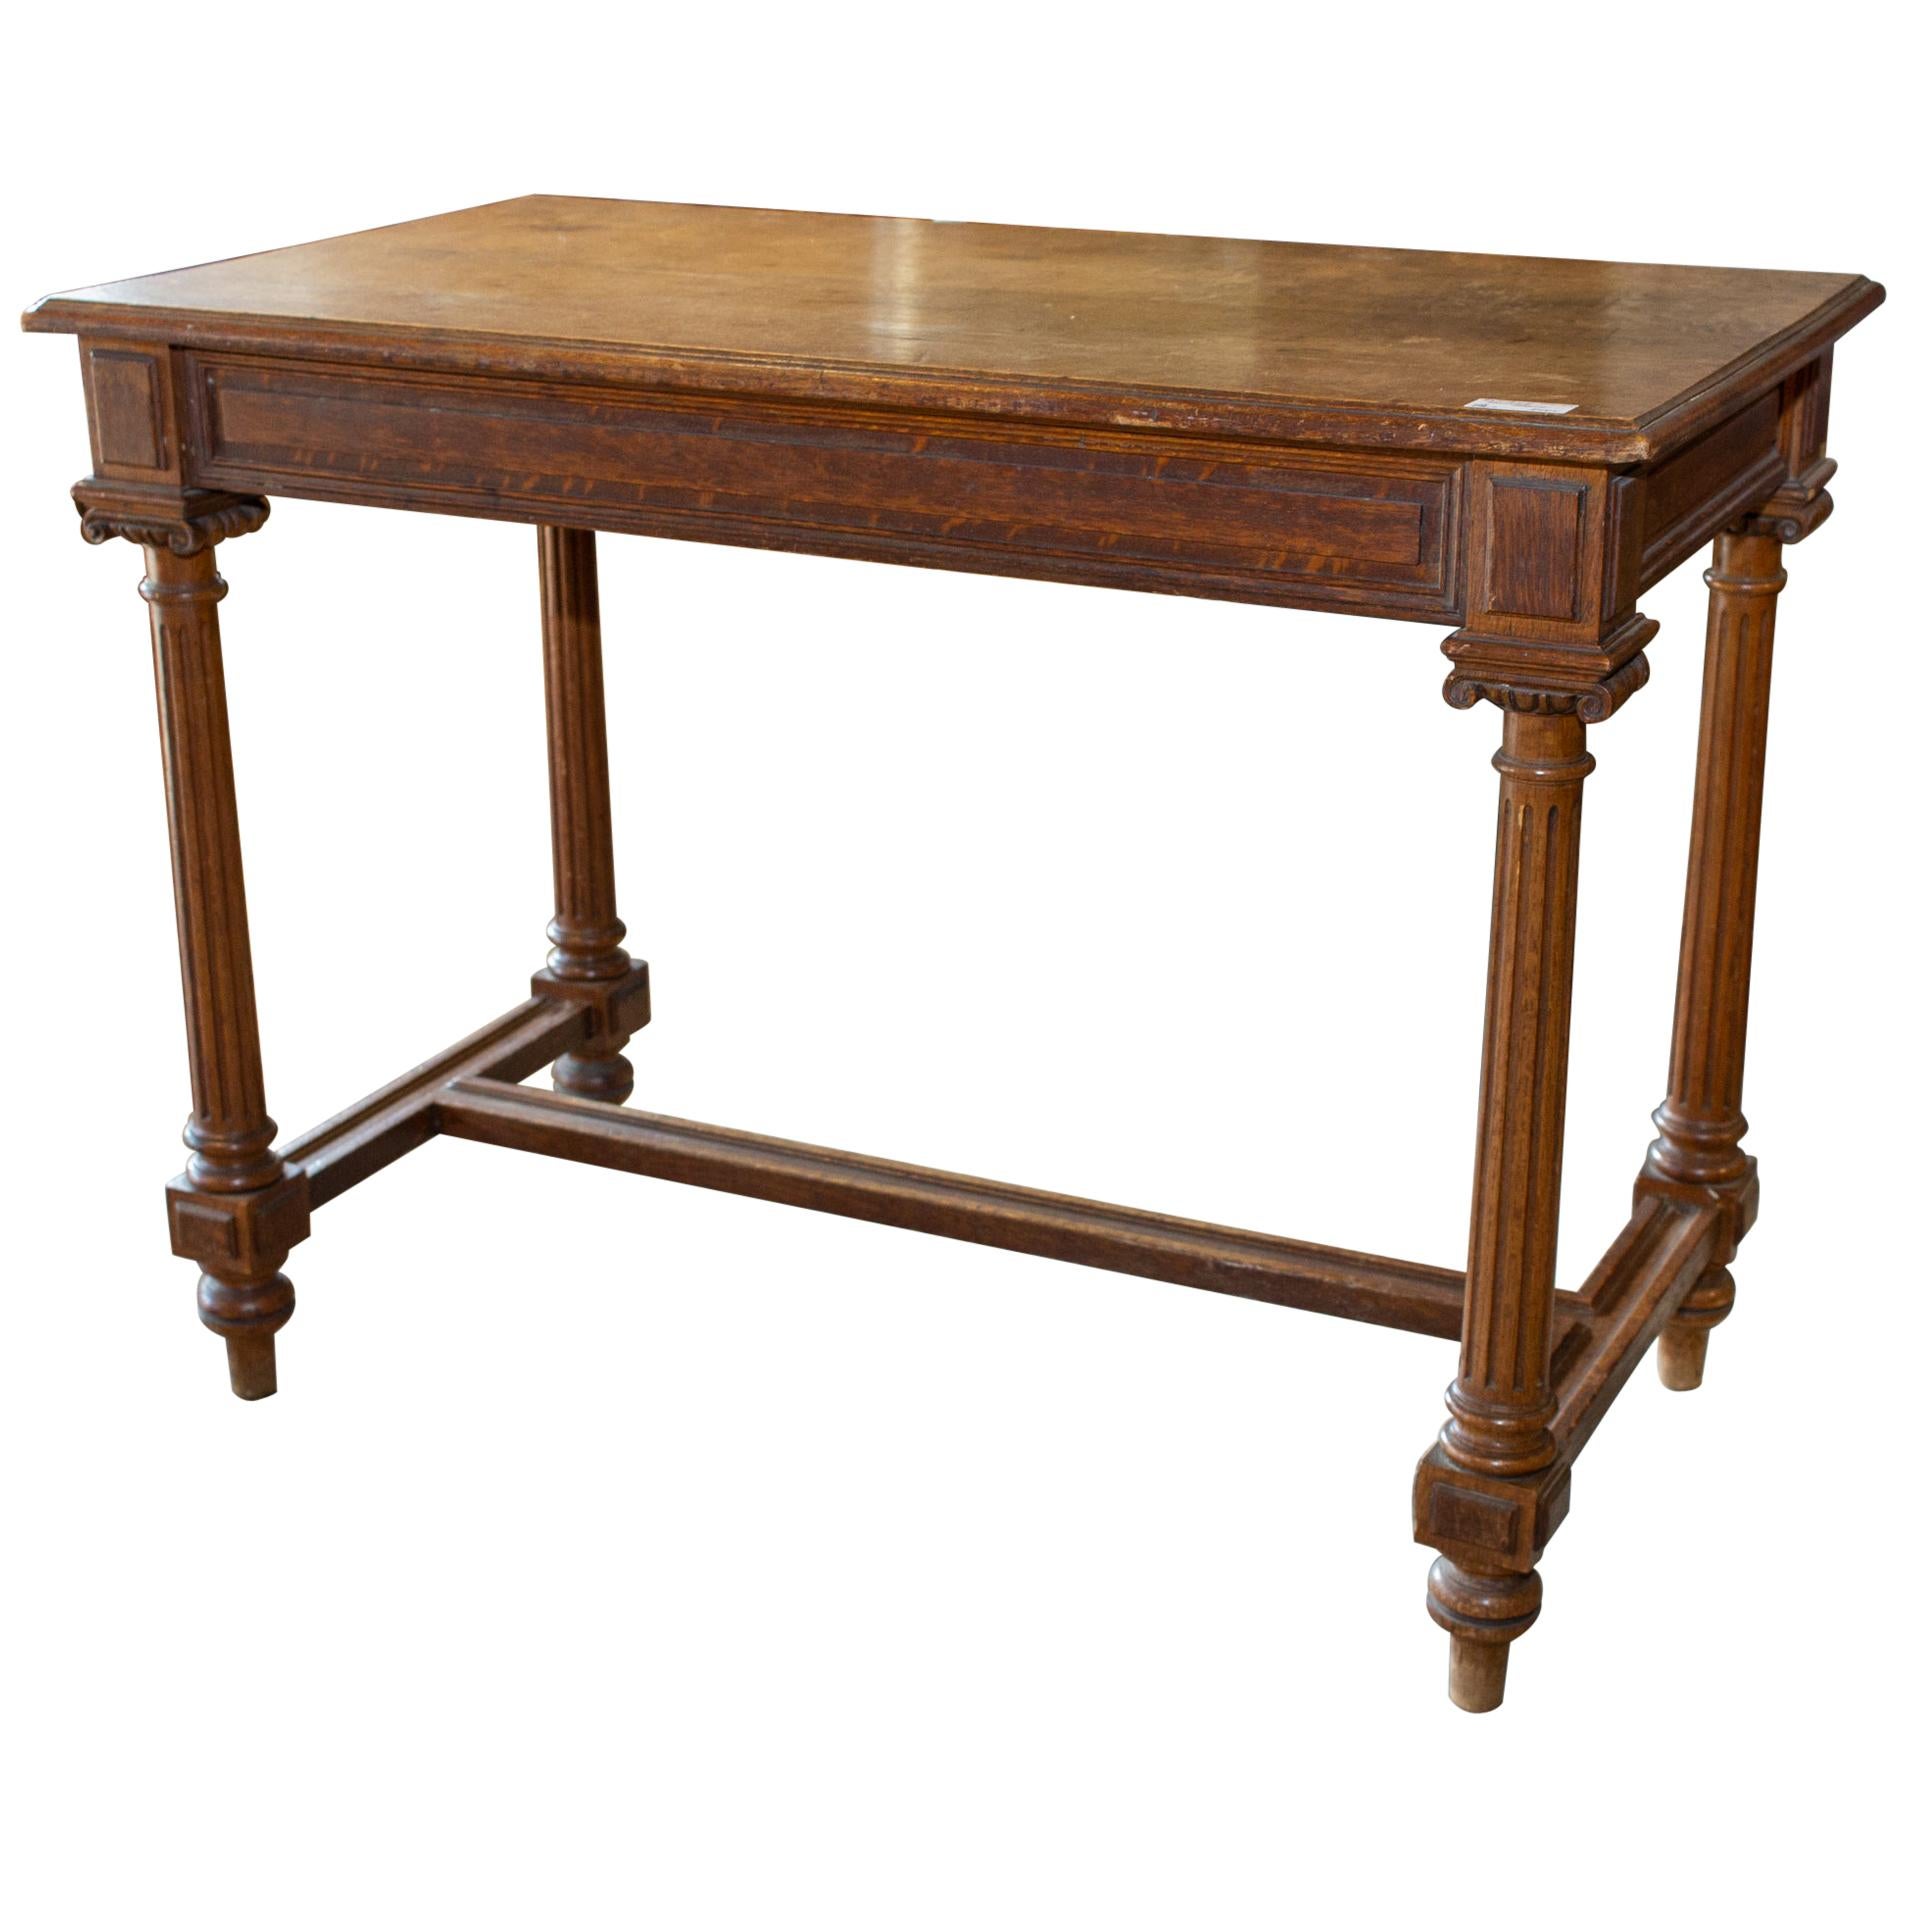 Antique French Carved Wood Empire Style Table, circa 1900